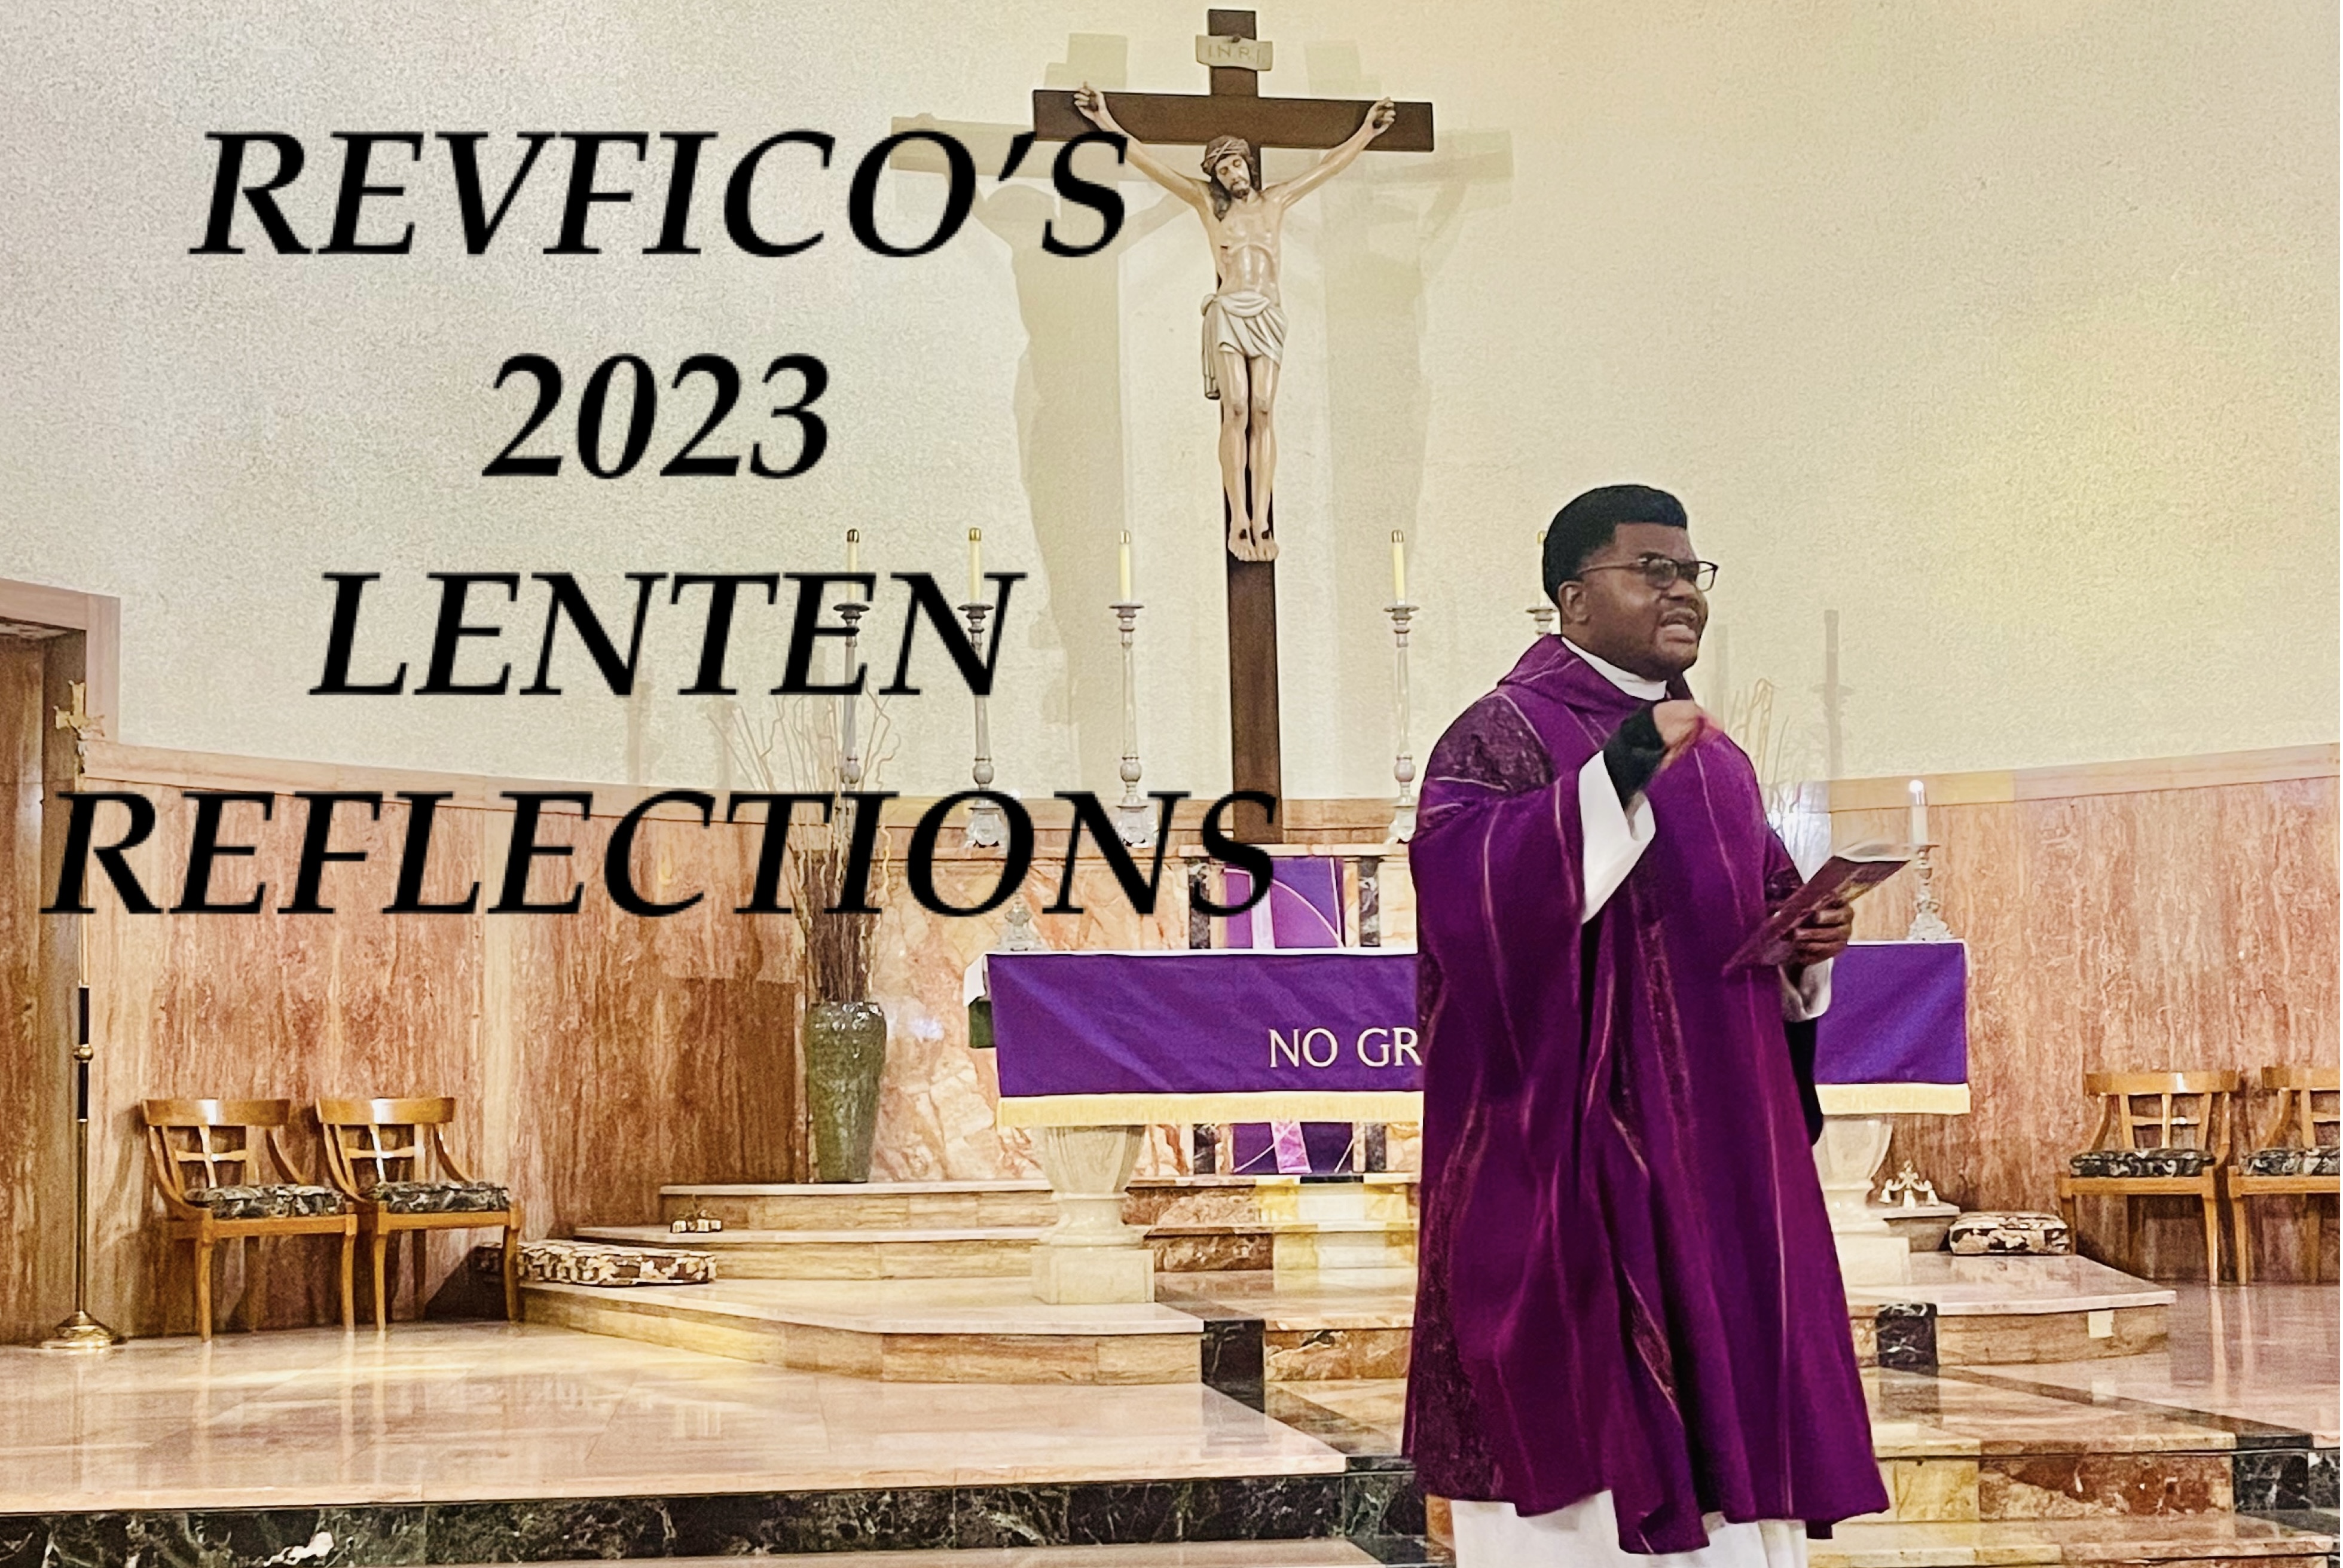 Third Sunday of Lent, Year A, 2023 Reflection by RevFICO